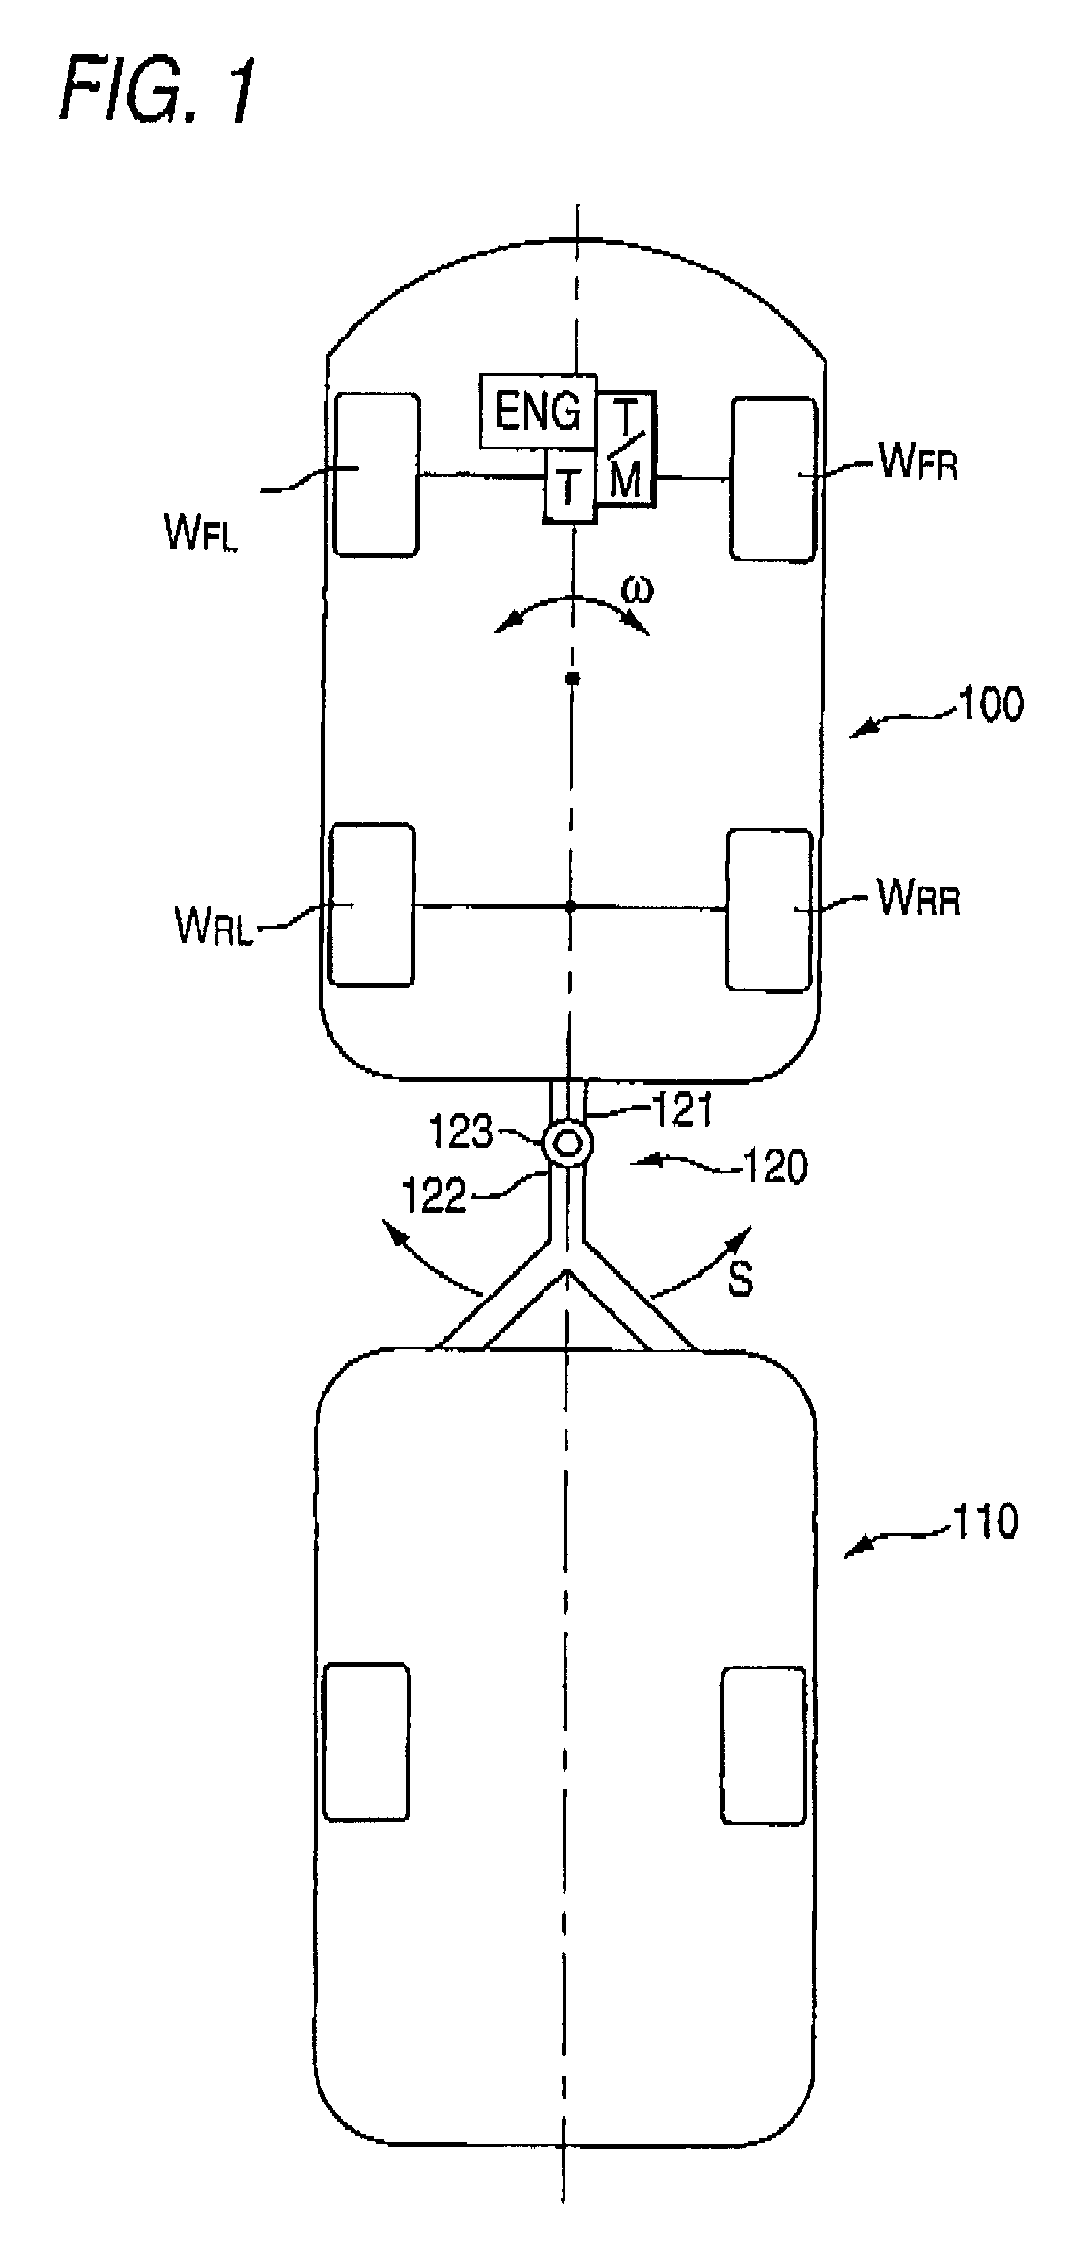 Movement stabilizing apparatus for combination vehicle